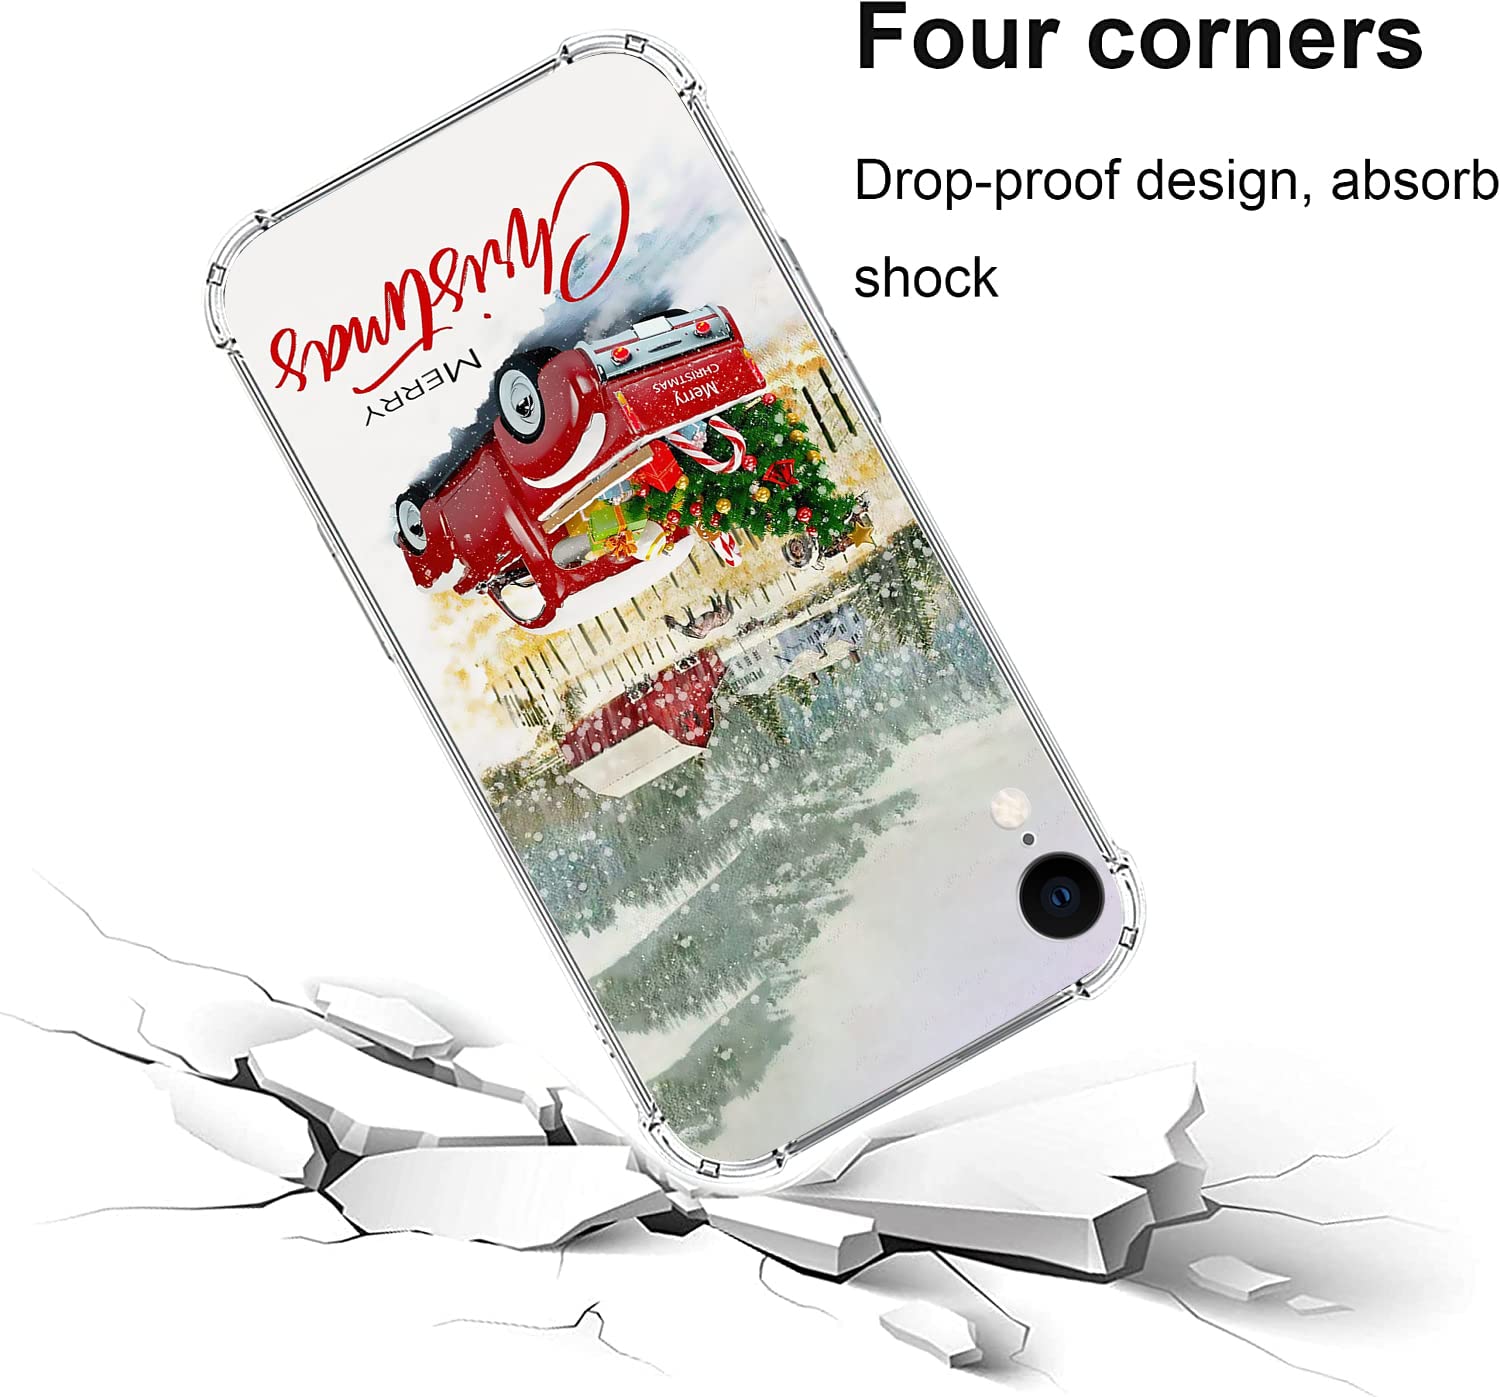 KOAIWPAE Christmas Case for iPhone XR, Christmas Tree Red Truck Pattern Clear Phone Case for Women Teens Girls, Four Corner Shockproof Fit Protective Case Designed for iPhone XR 6.1